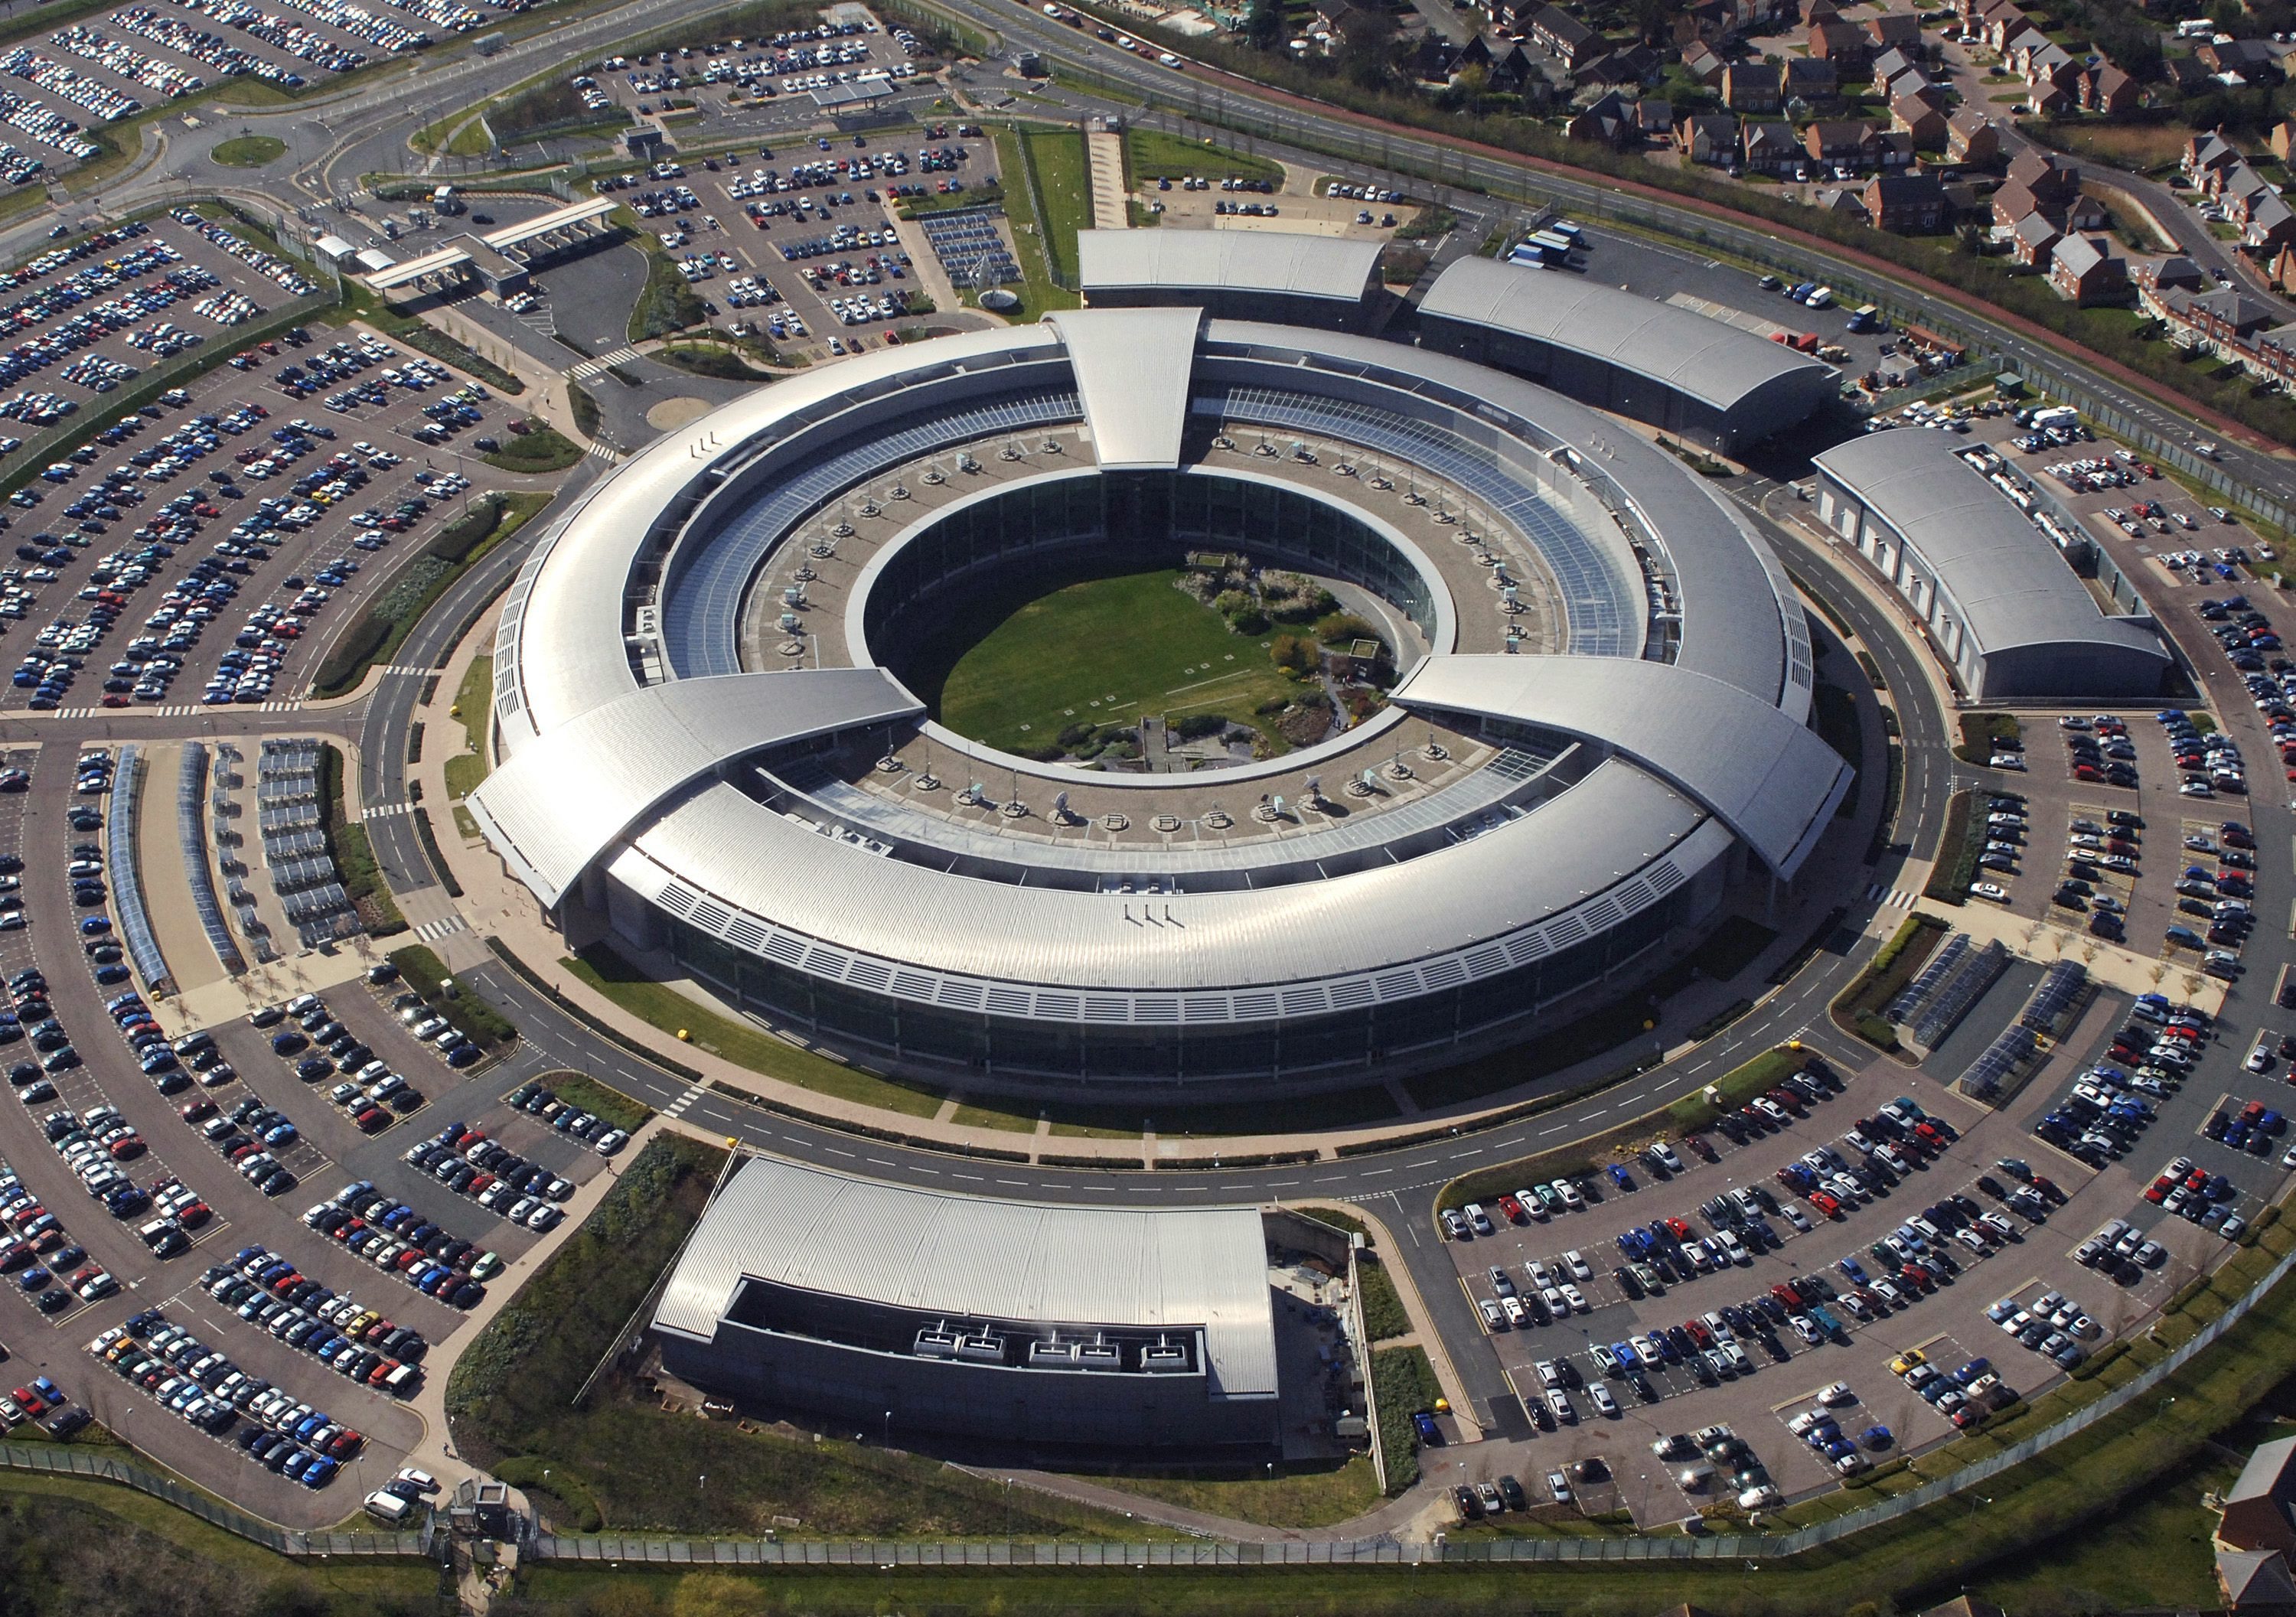 The British Government Communications Headquarters (GCHQ) in Cheltenham, Gloucestershire, west central England.